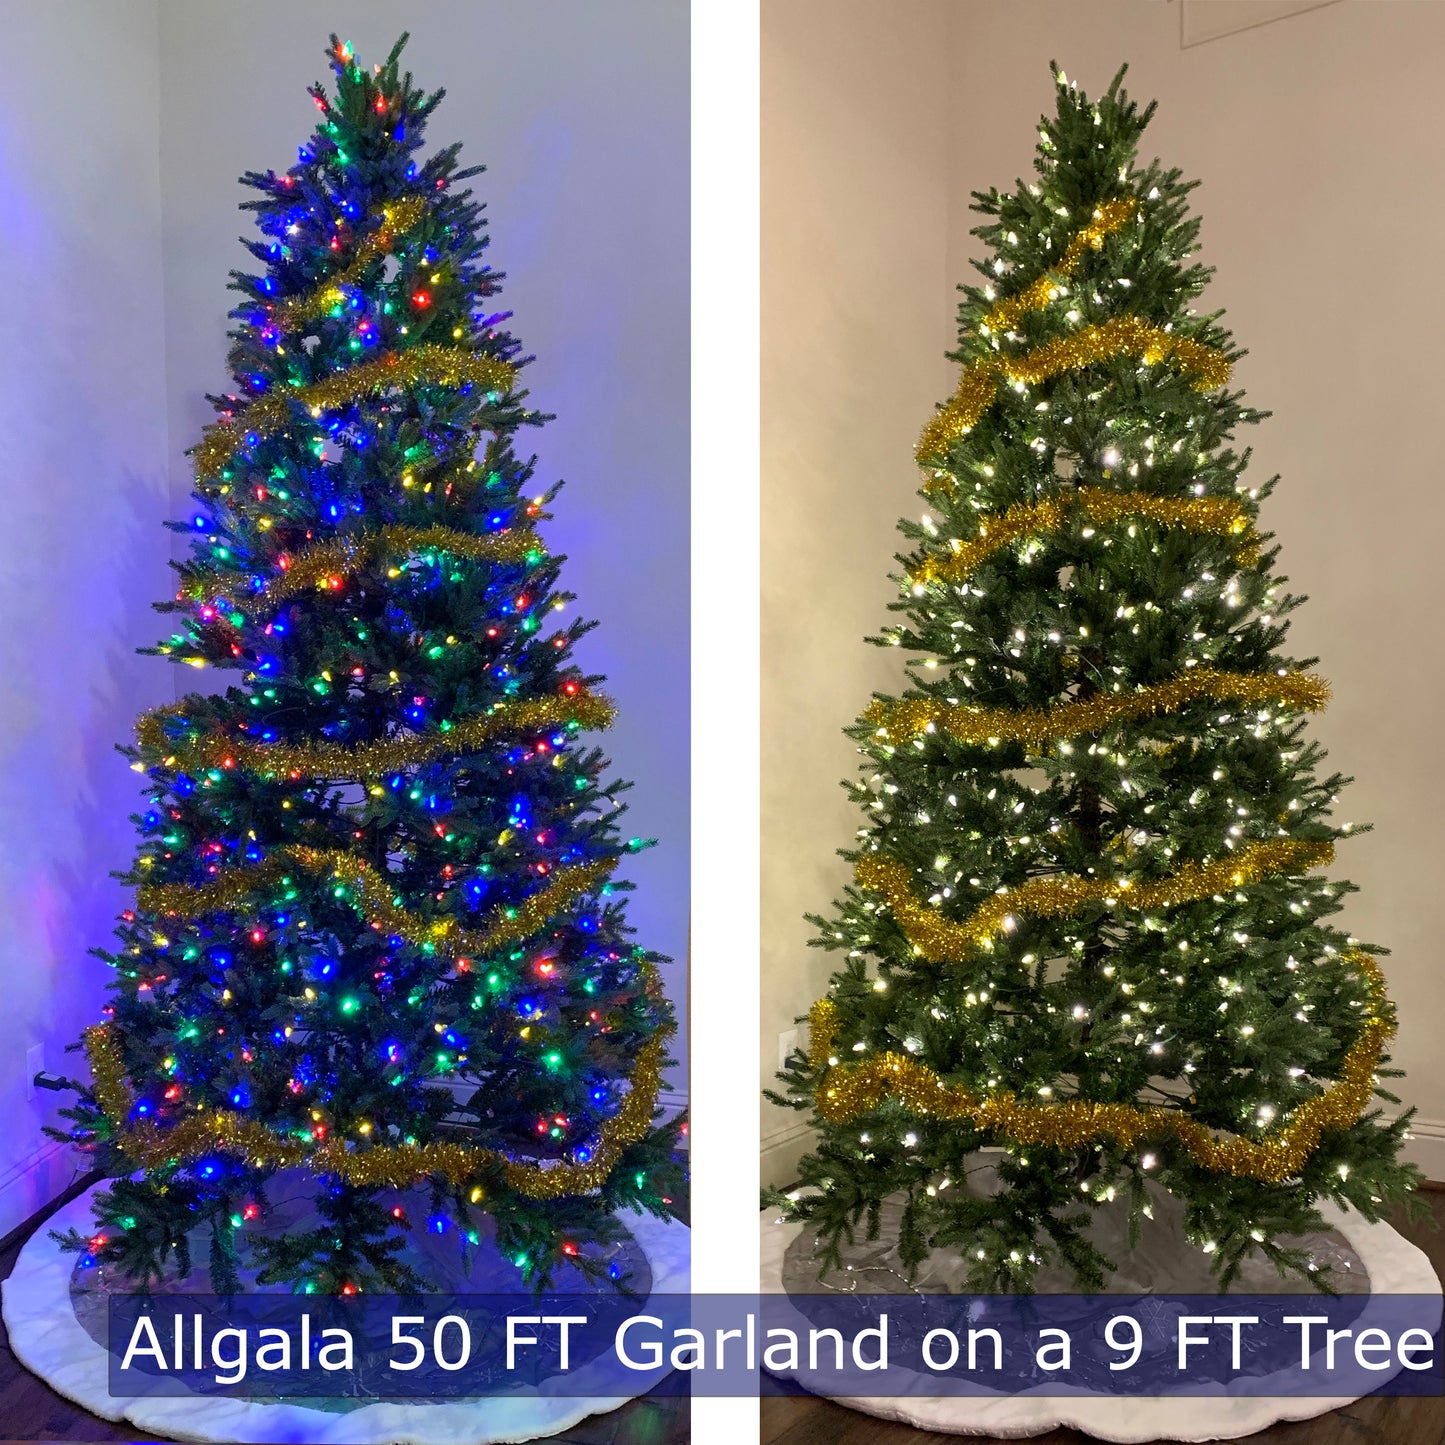 Allgala Christmas Garland 50 Feet Foil Tinsel Decoration for Holiday Tree Walll Rail Home Office Even